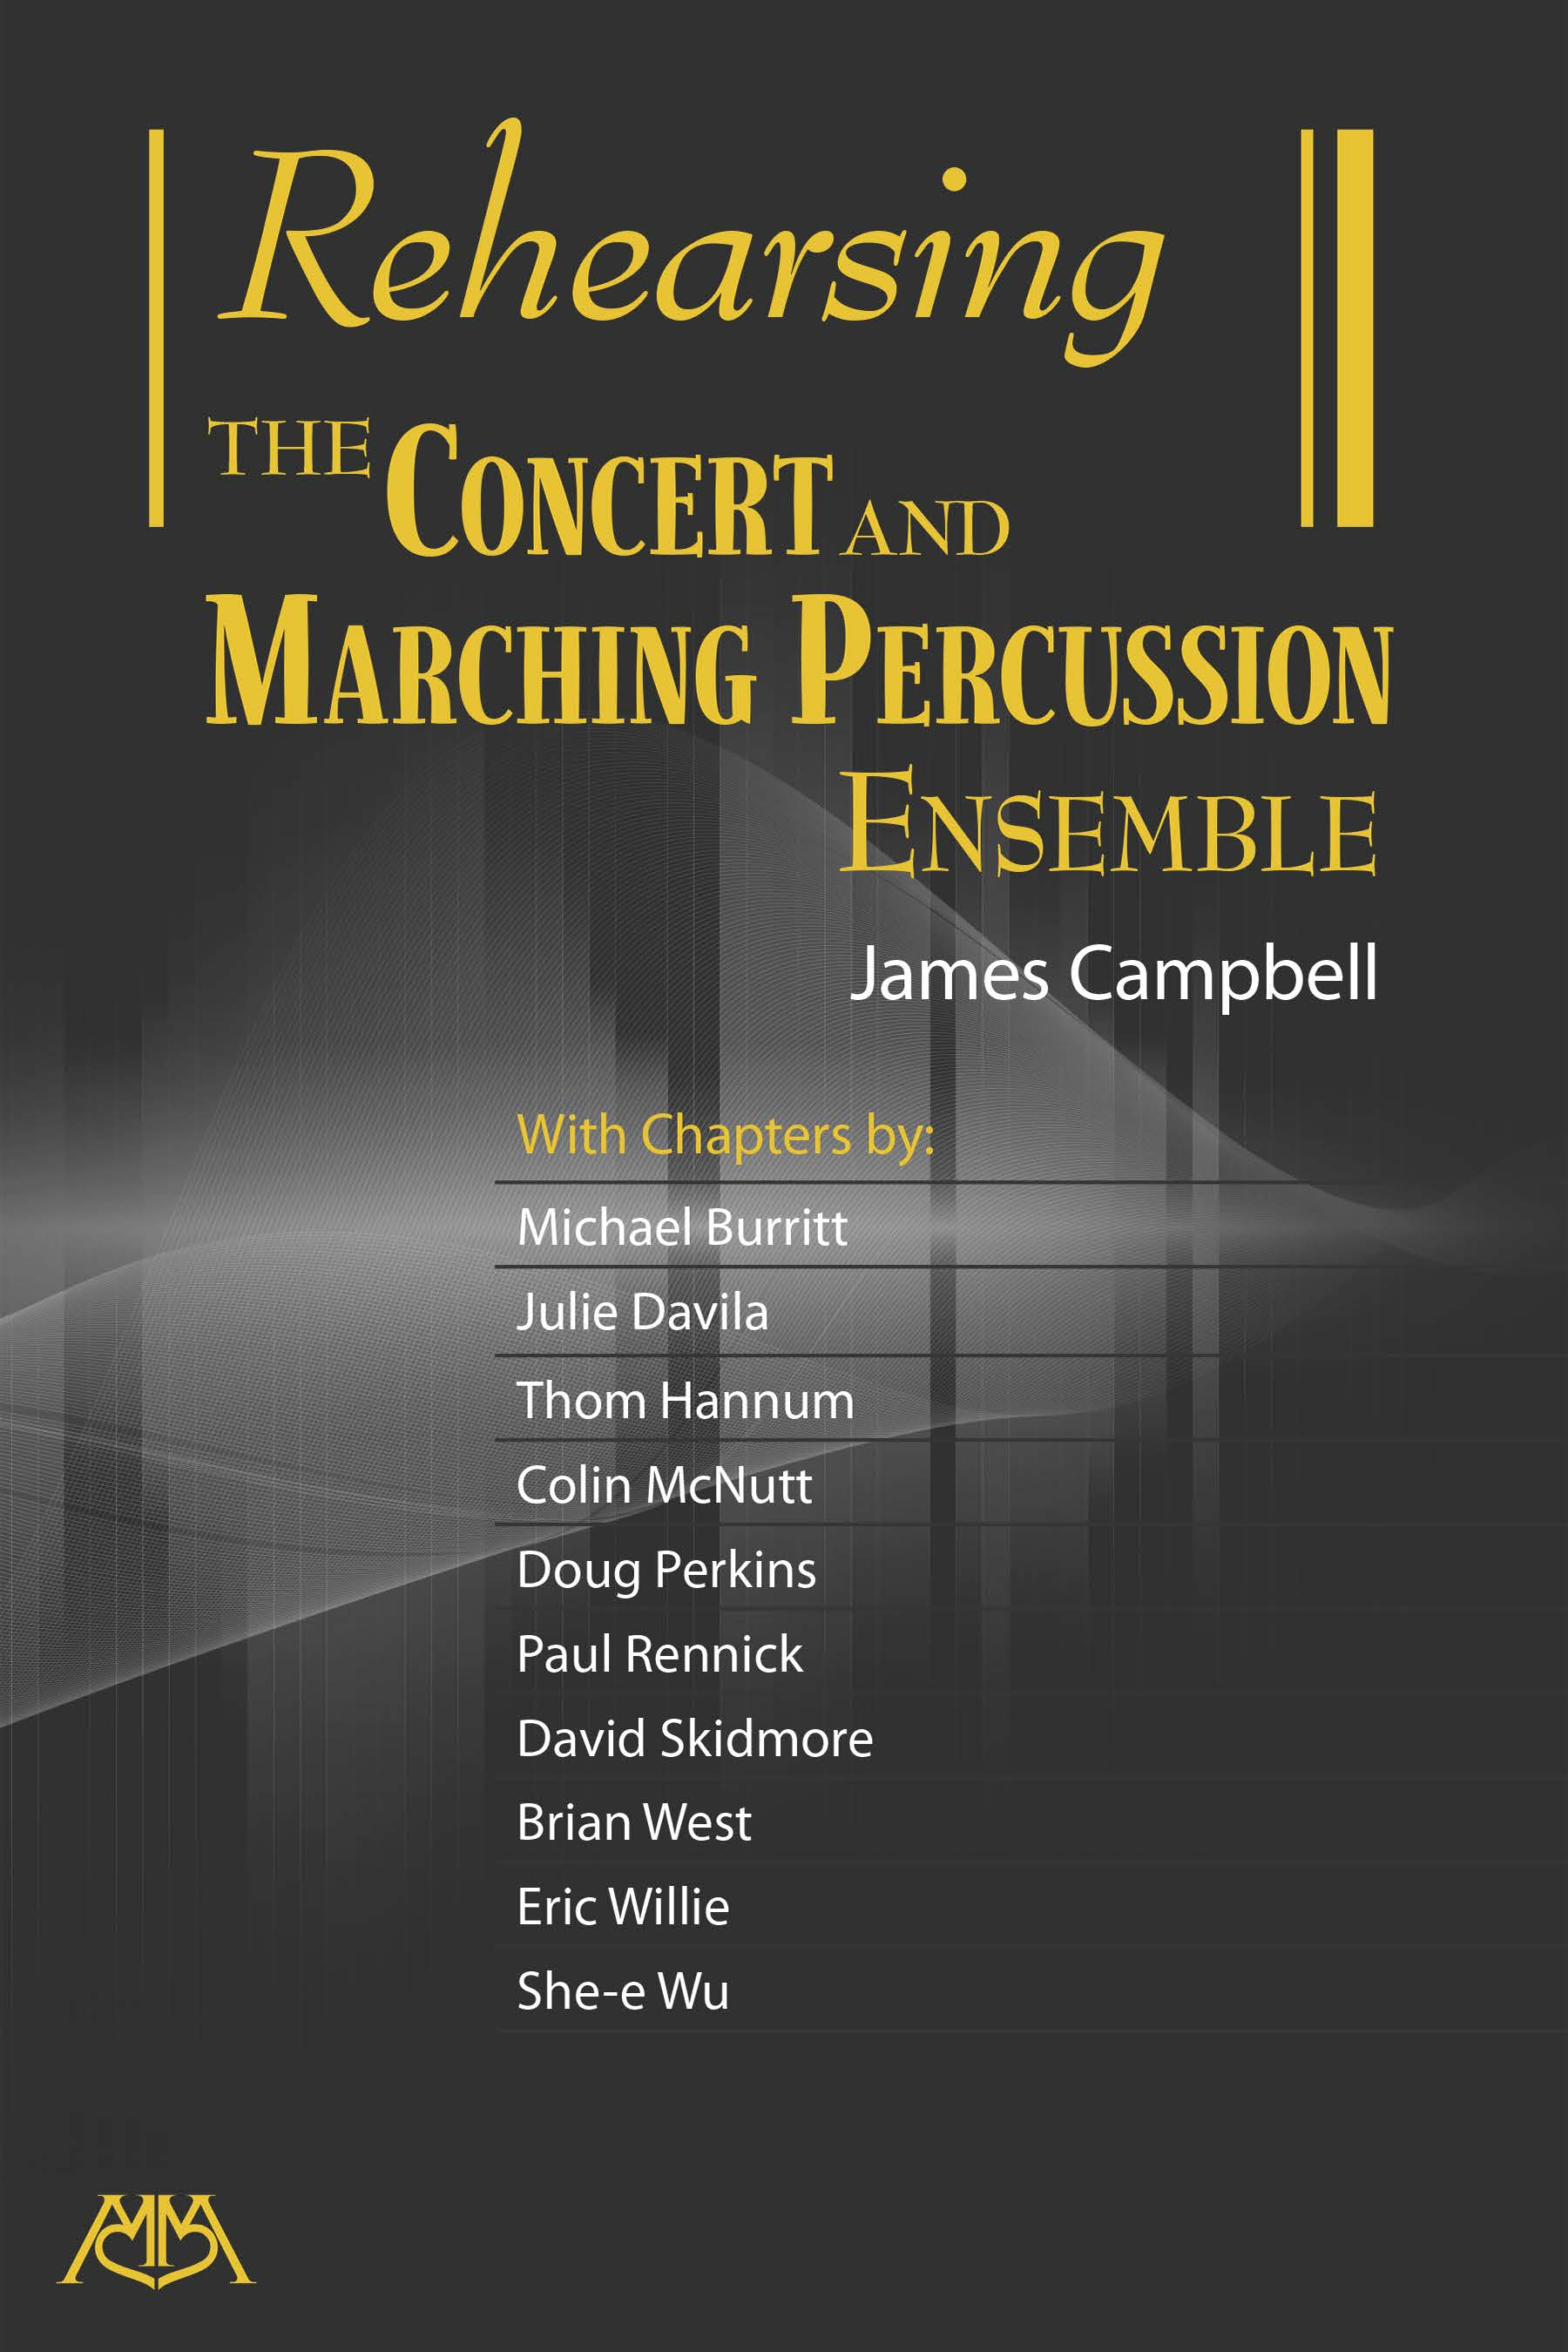 Rehearsing the Concert and Marching Percussion Ensemble band sheet music cover